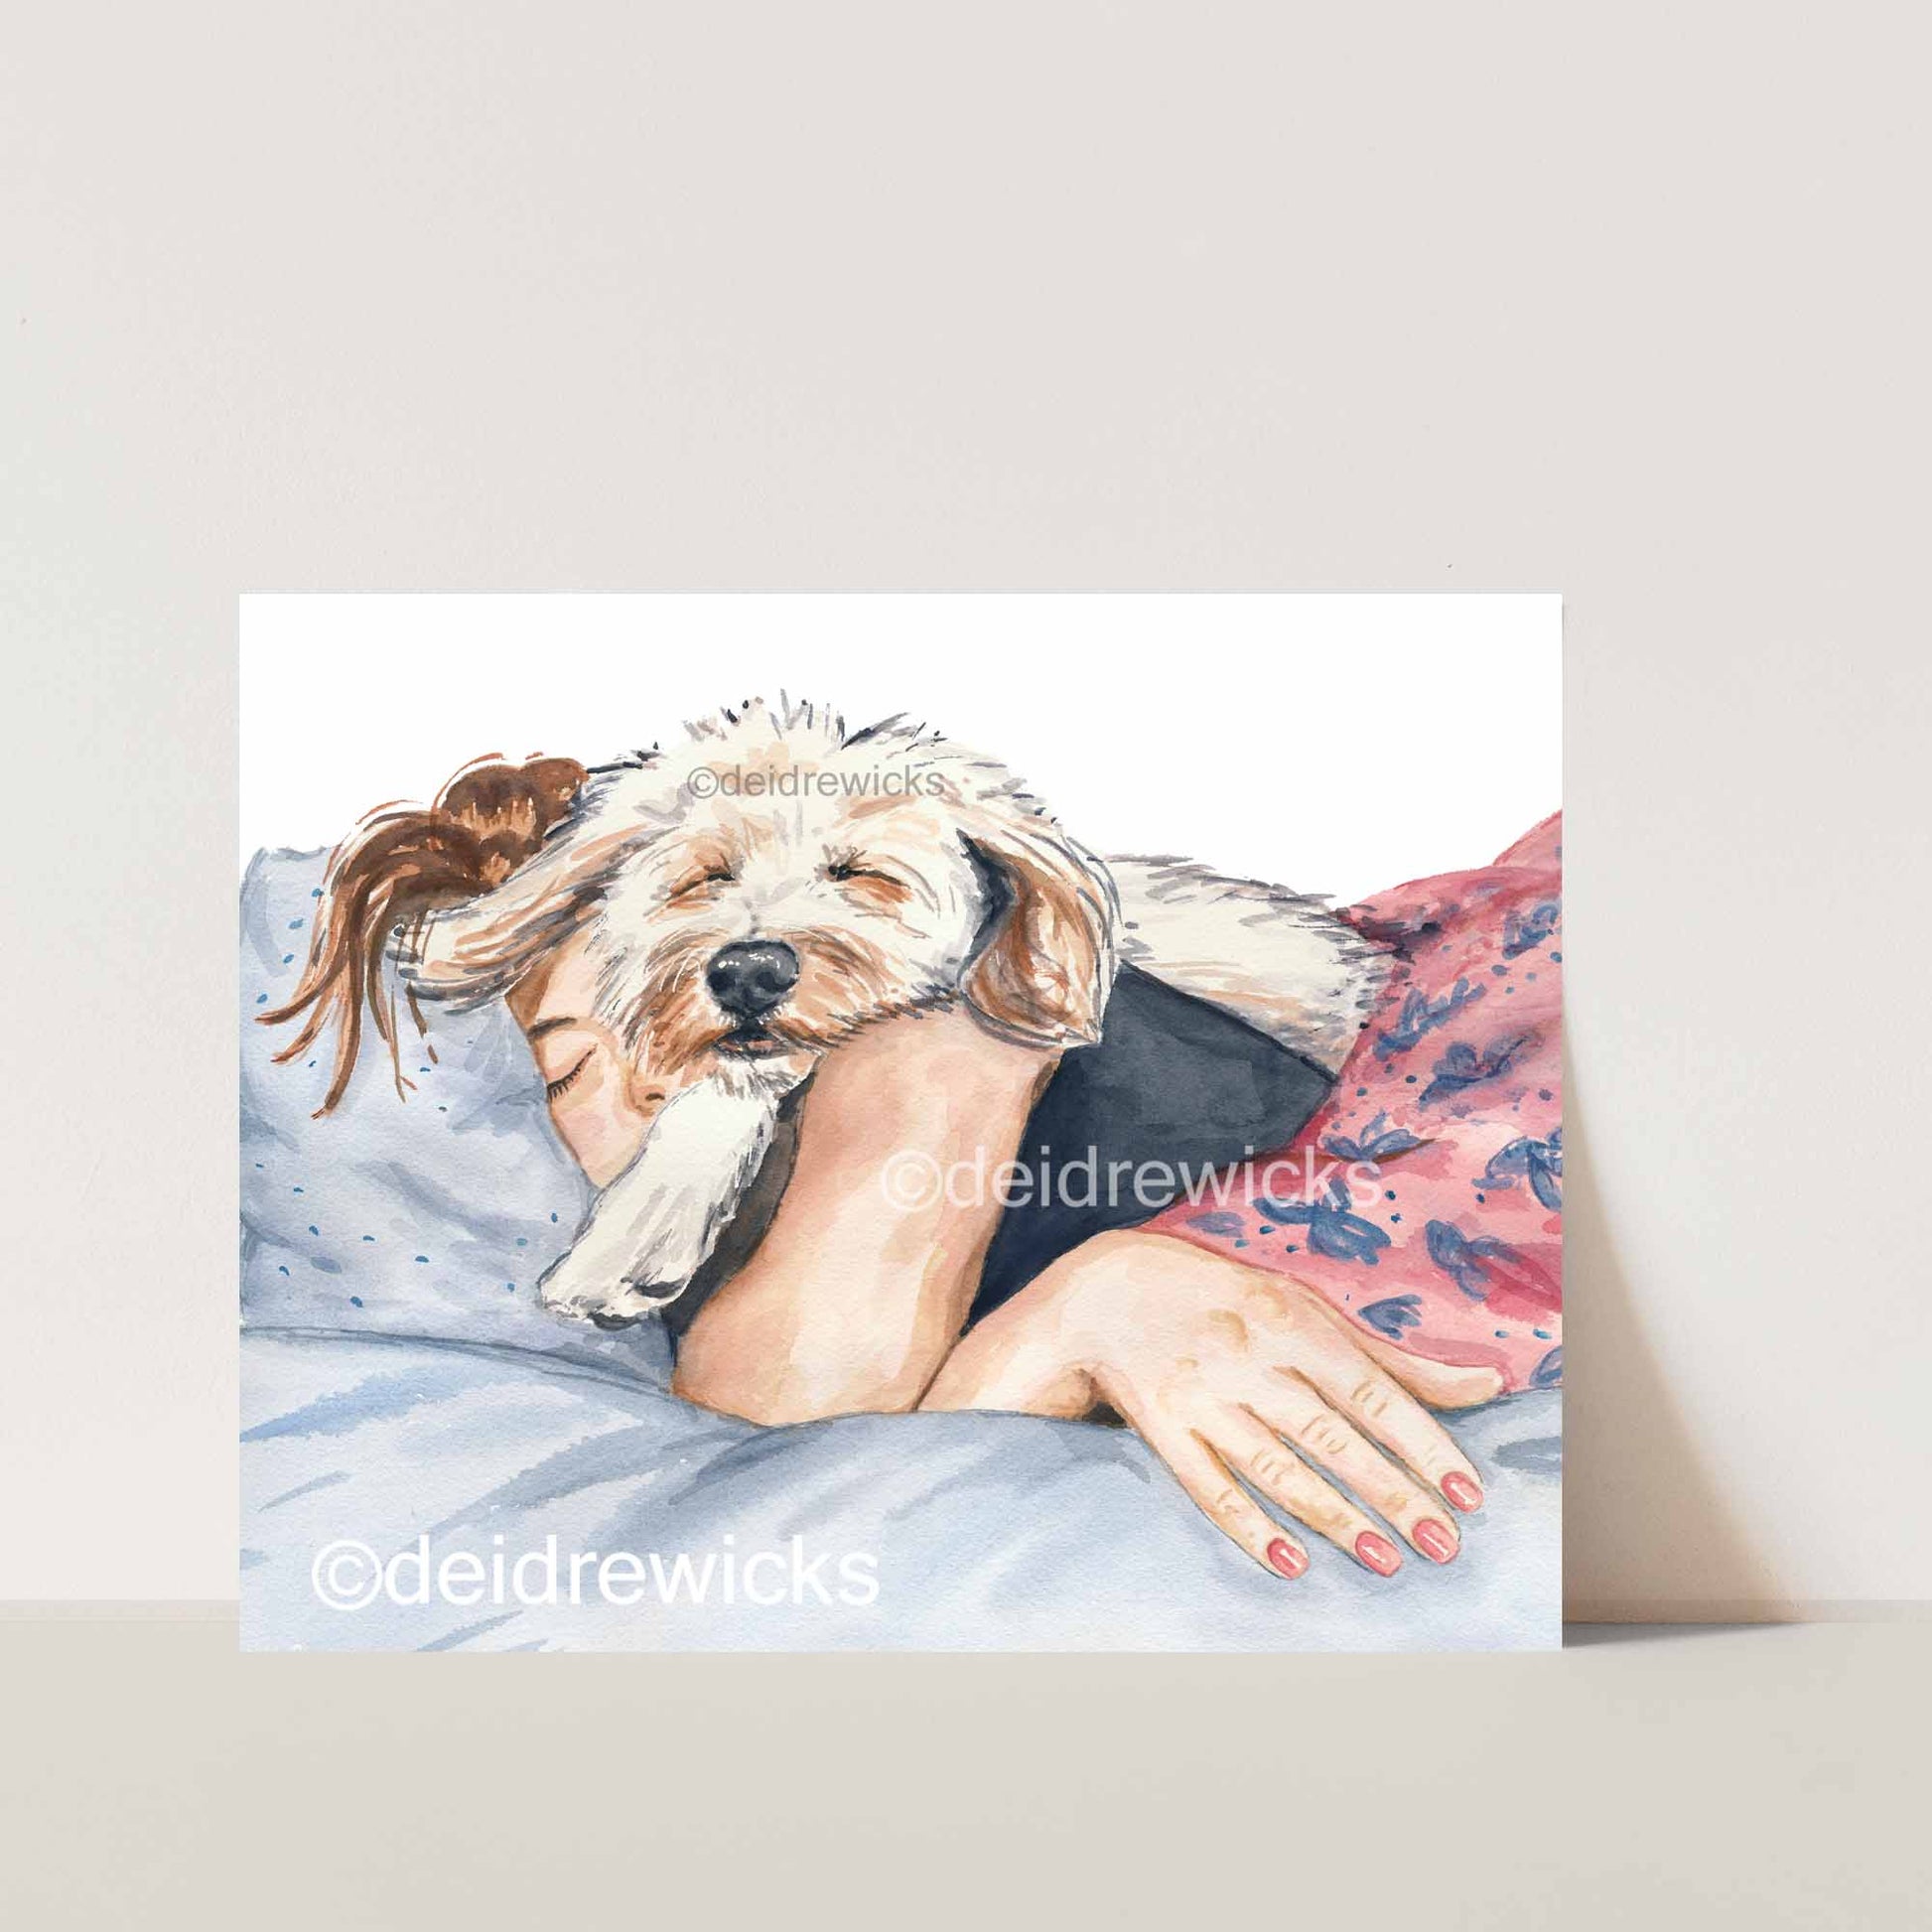 Watercolour painting print of a dark haired girl sleeping with her poodle mix dog